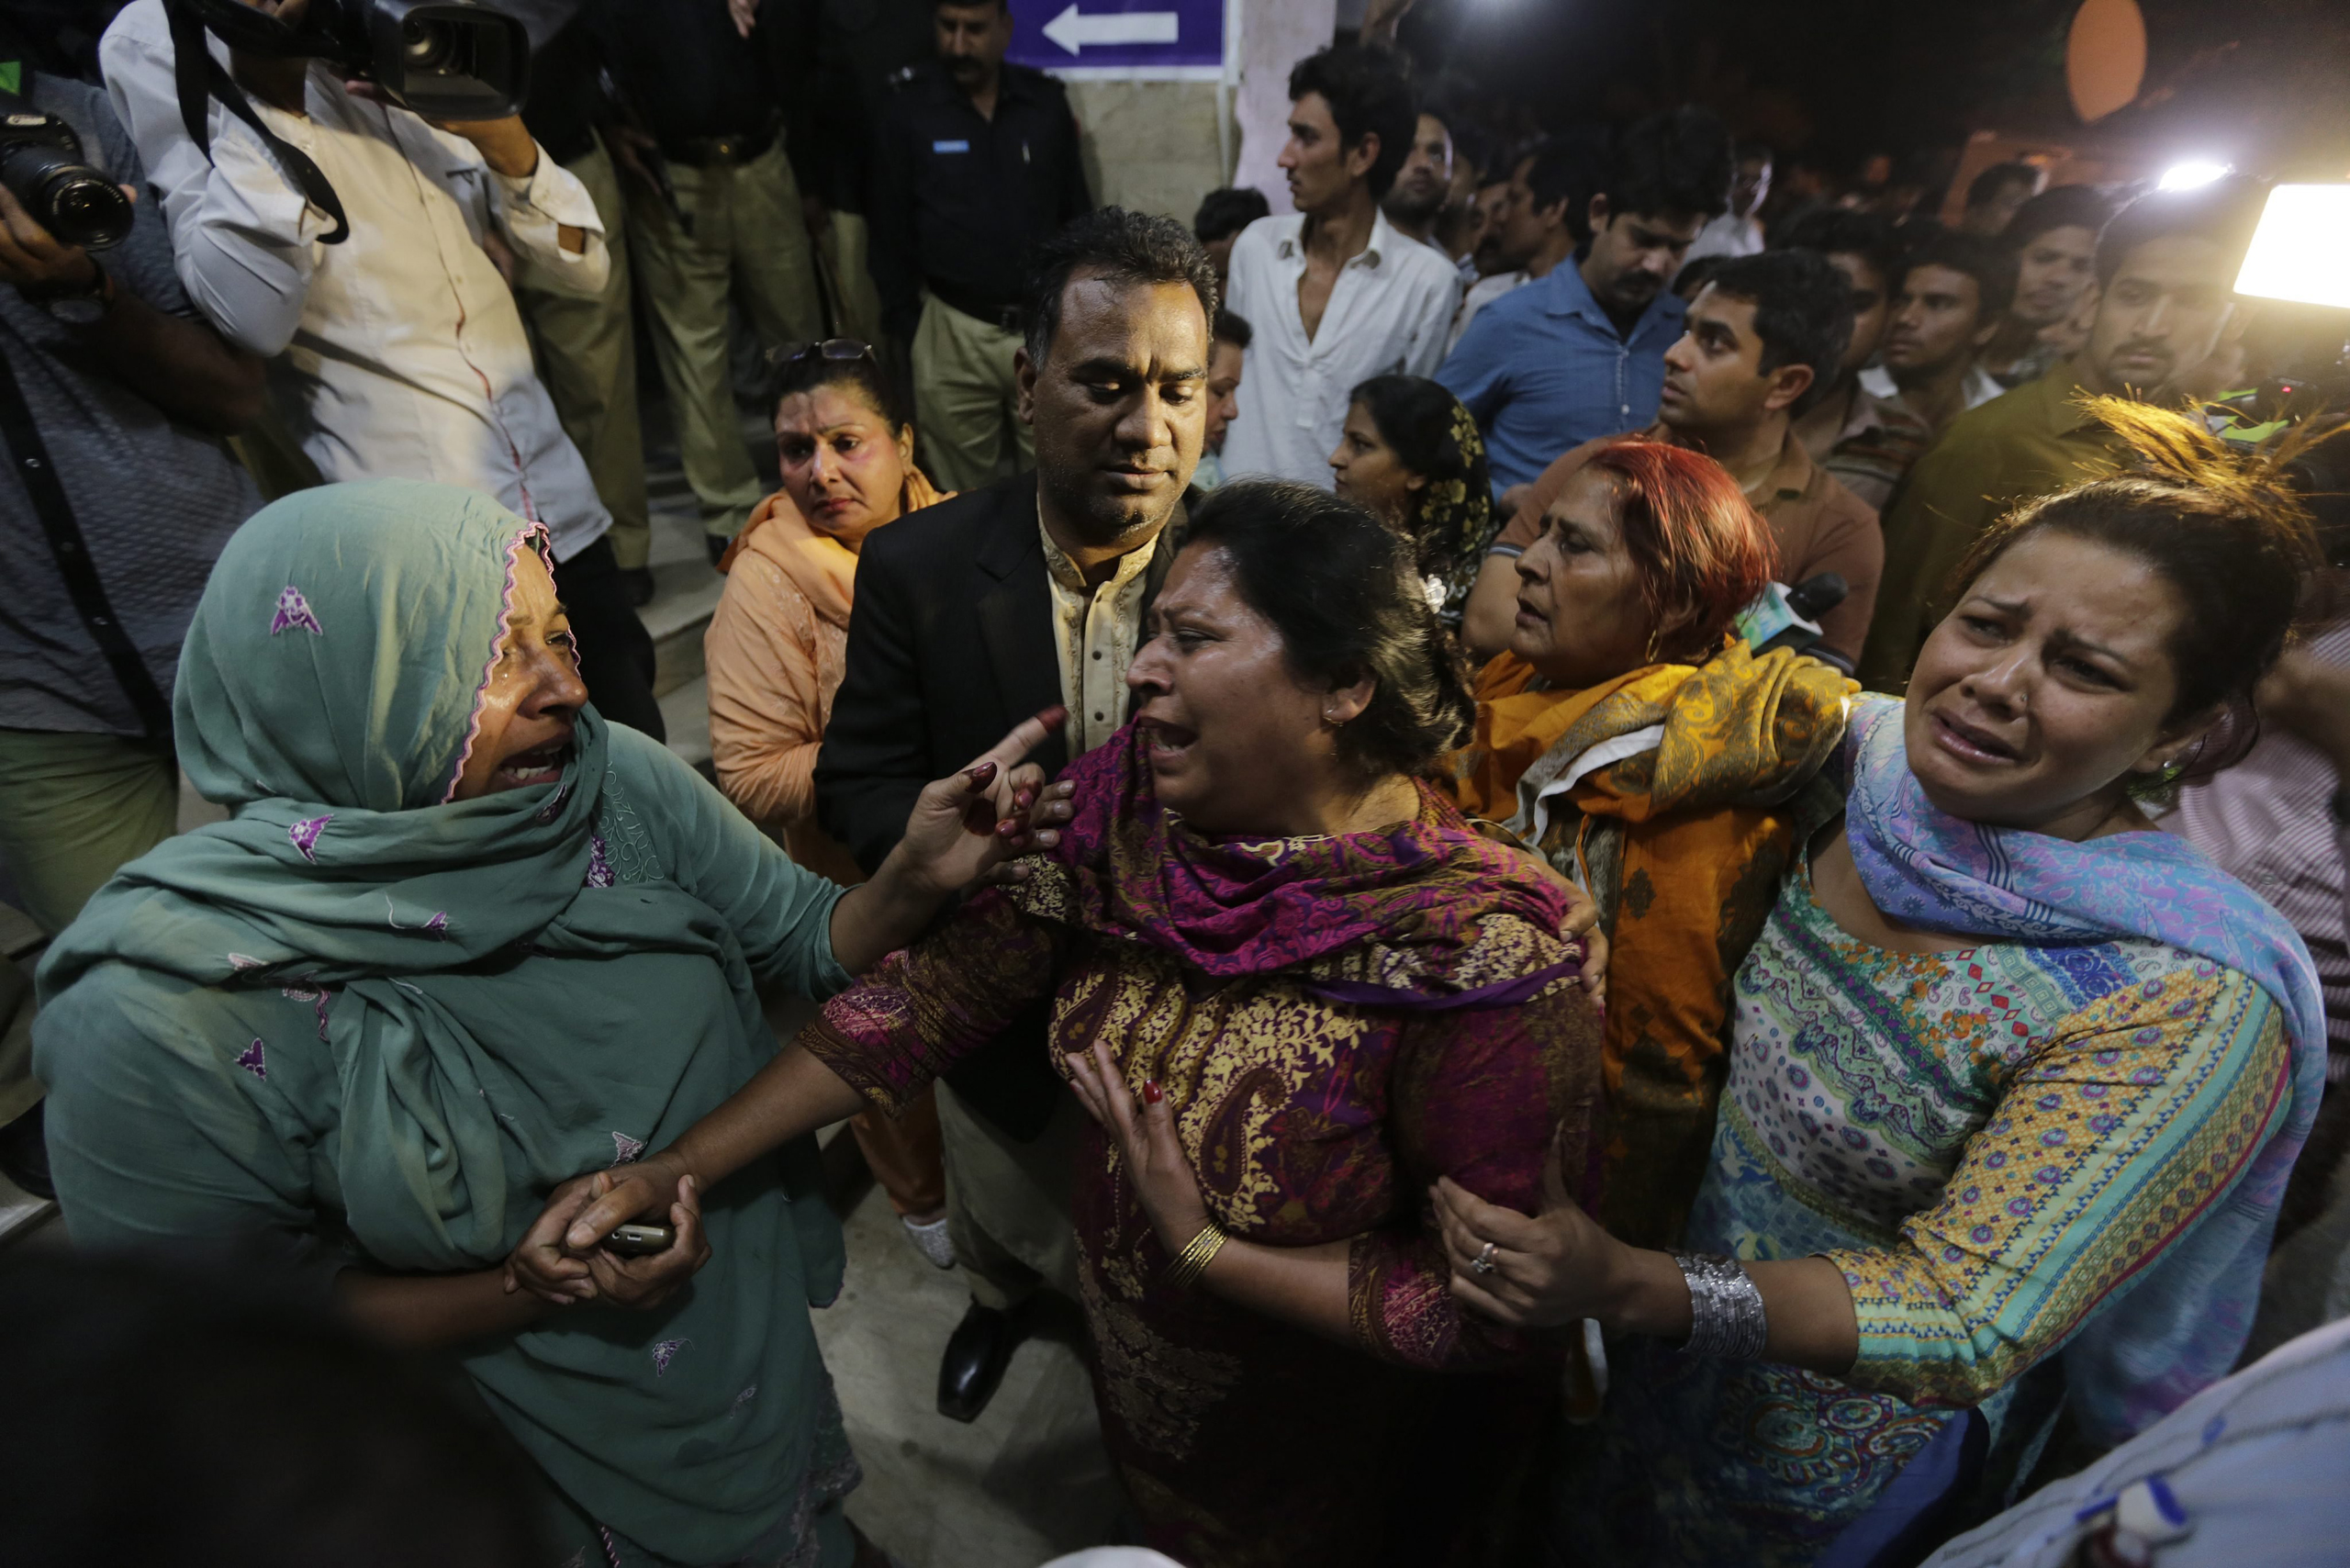 Relatives of the victims of a suicide bomb blast cry outside a hospital in Lahore, Pakistan, on March 27, 2016.